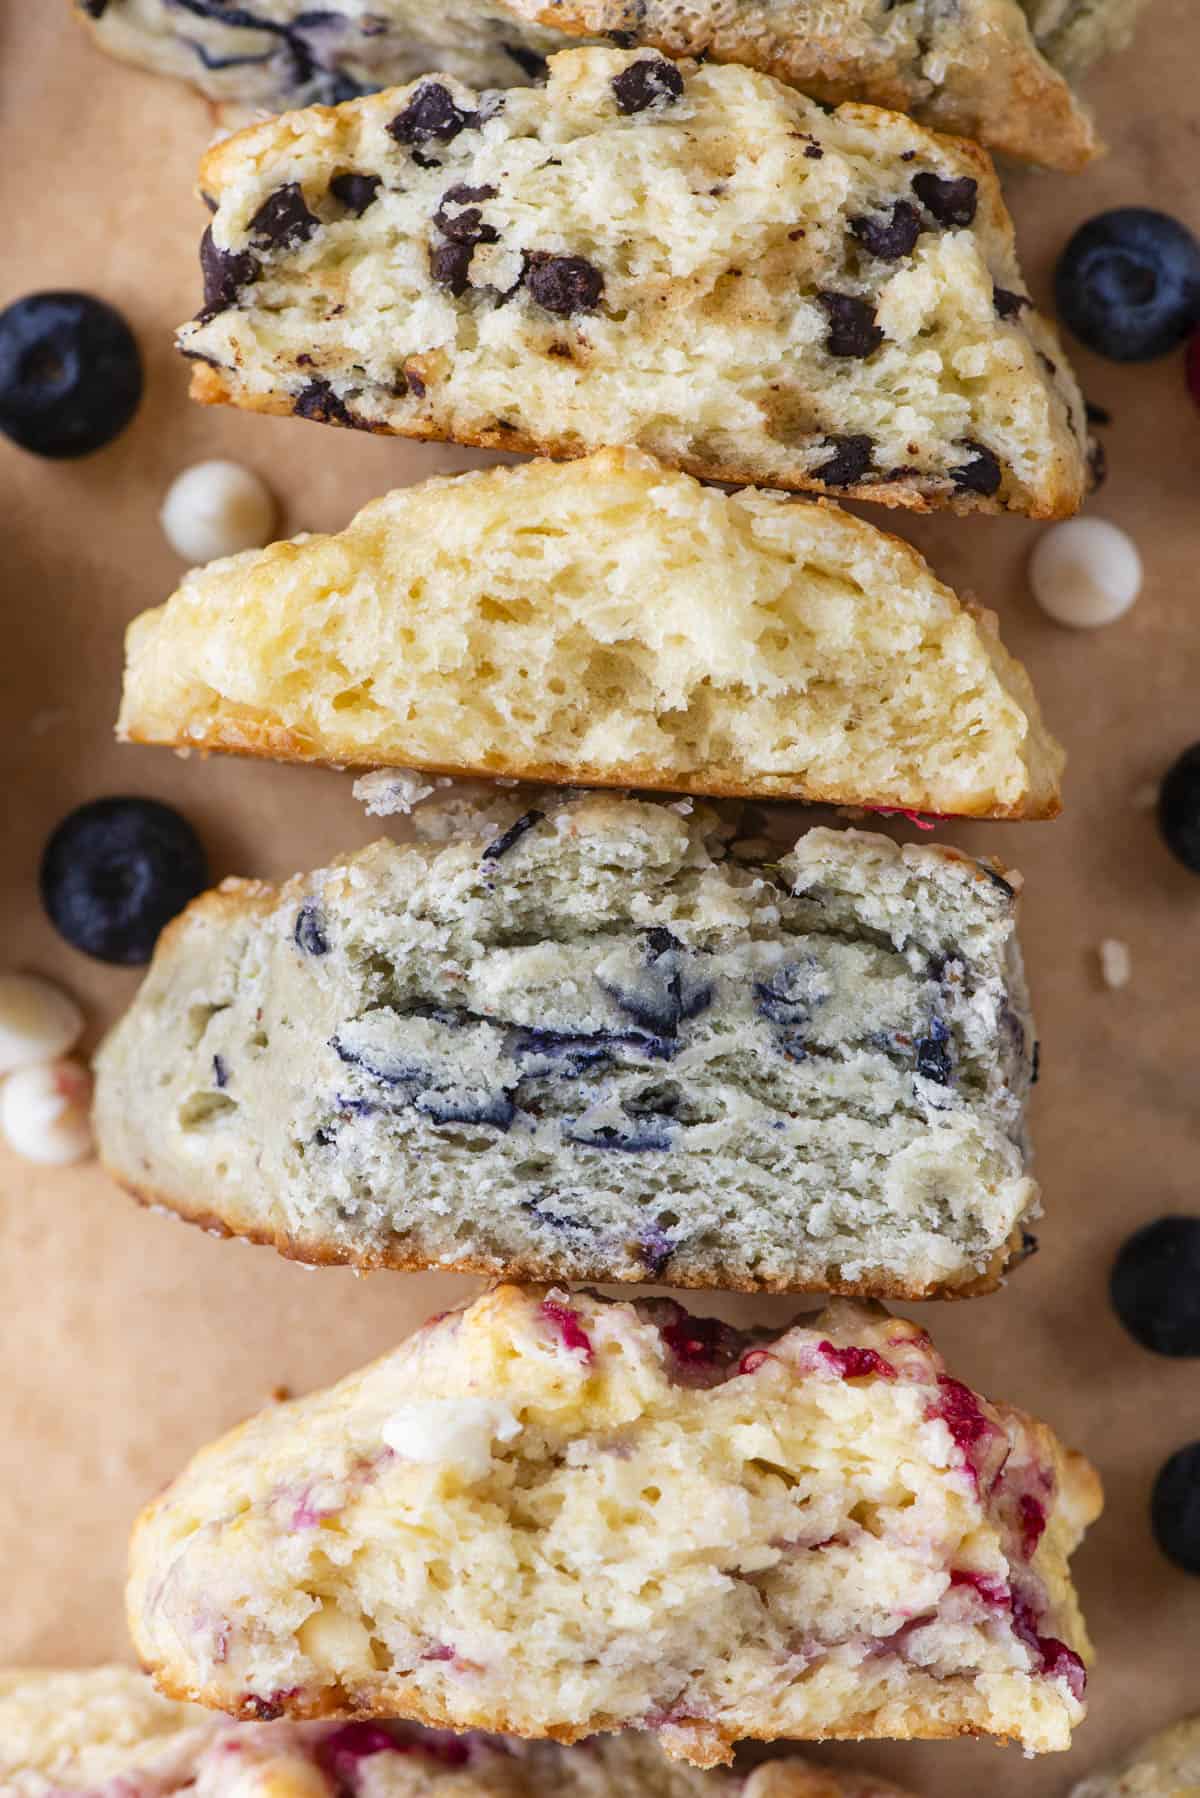 an assortment of scone flavors on their sides cut open showing the insides including chocolate chip, plain, blueberry and white chocolate raspberry, with fresh berries and white chocolate chips sprinkled around